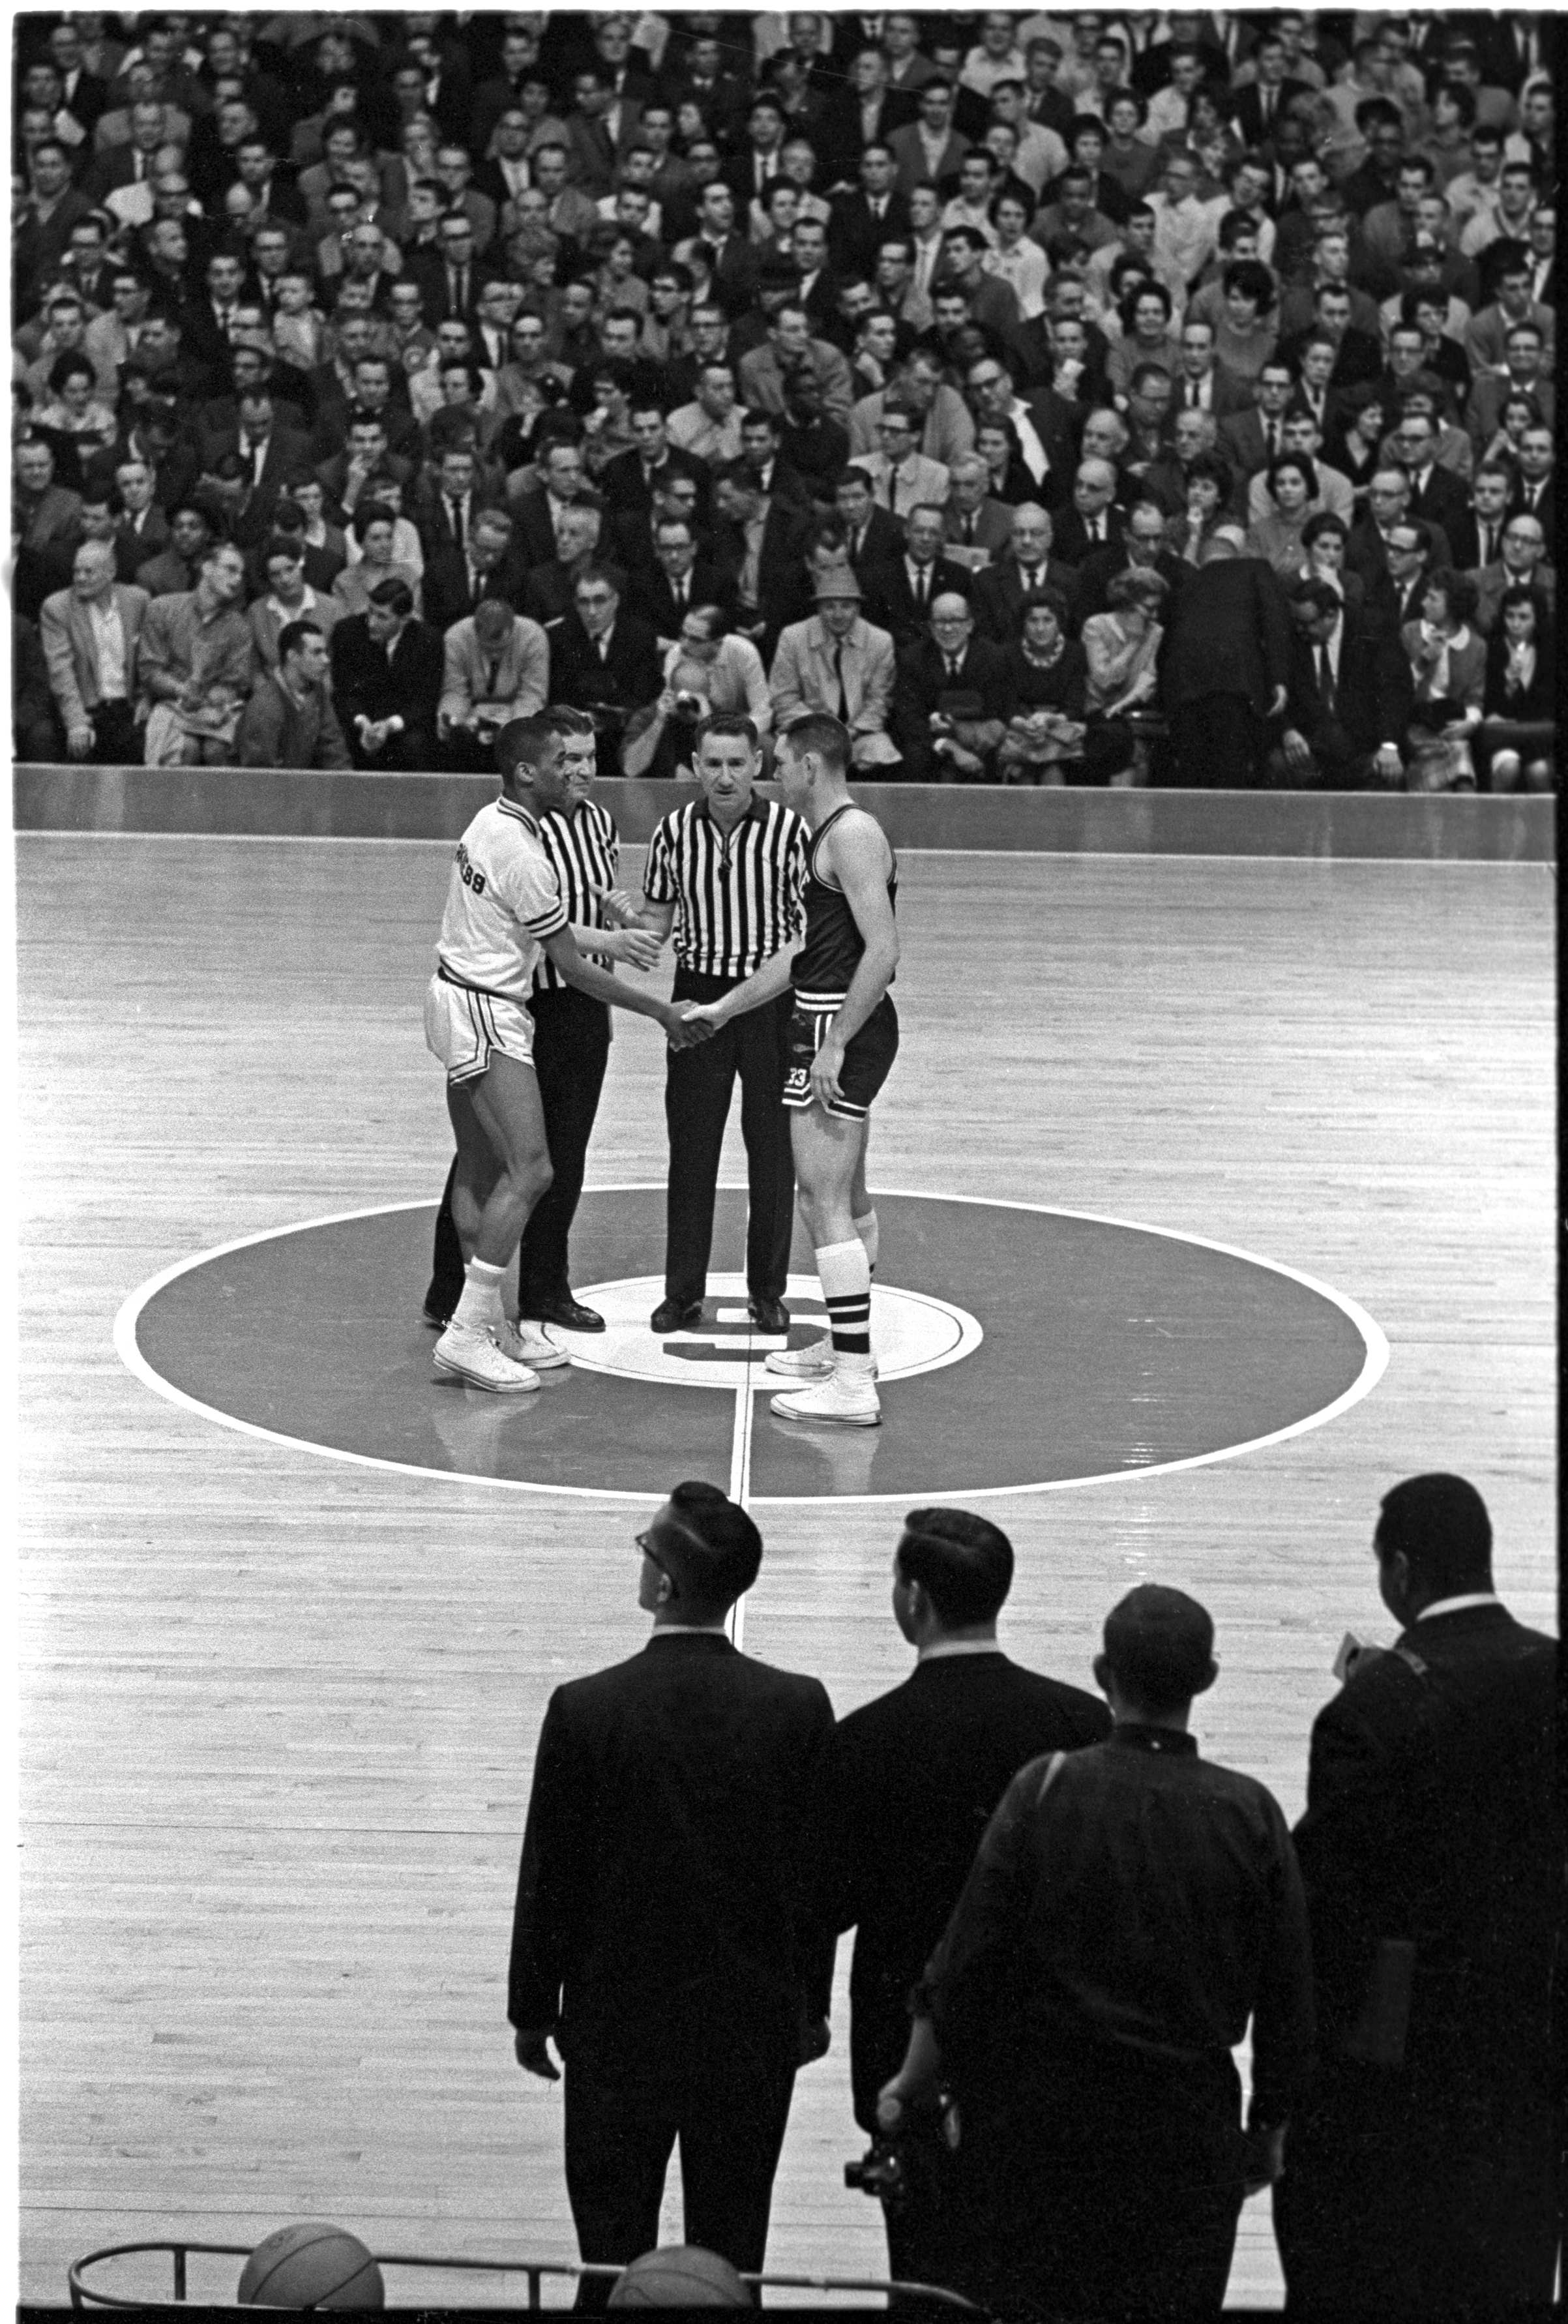 Loyola player Jerry Harkness extends his hand to Joe Dan Gold of Mississippi State on March 15, 1963, before the tip-off of an NCAA tournament game in East Lansing, Michigan. (Rich Clarkson—NCAA Photos/Getty Images)